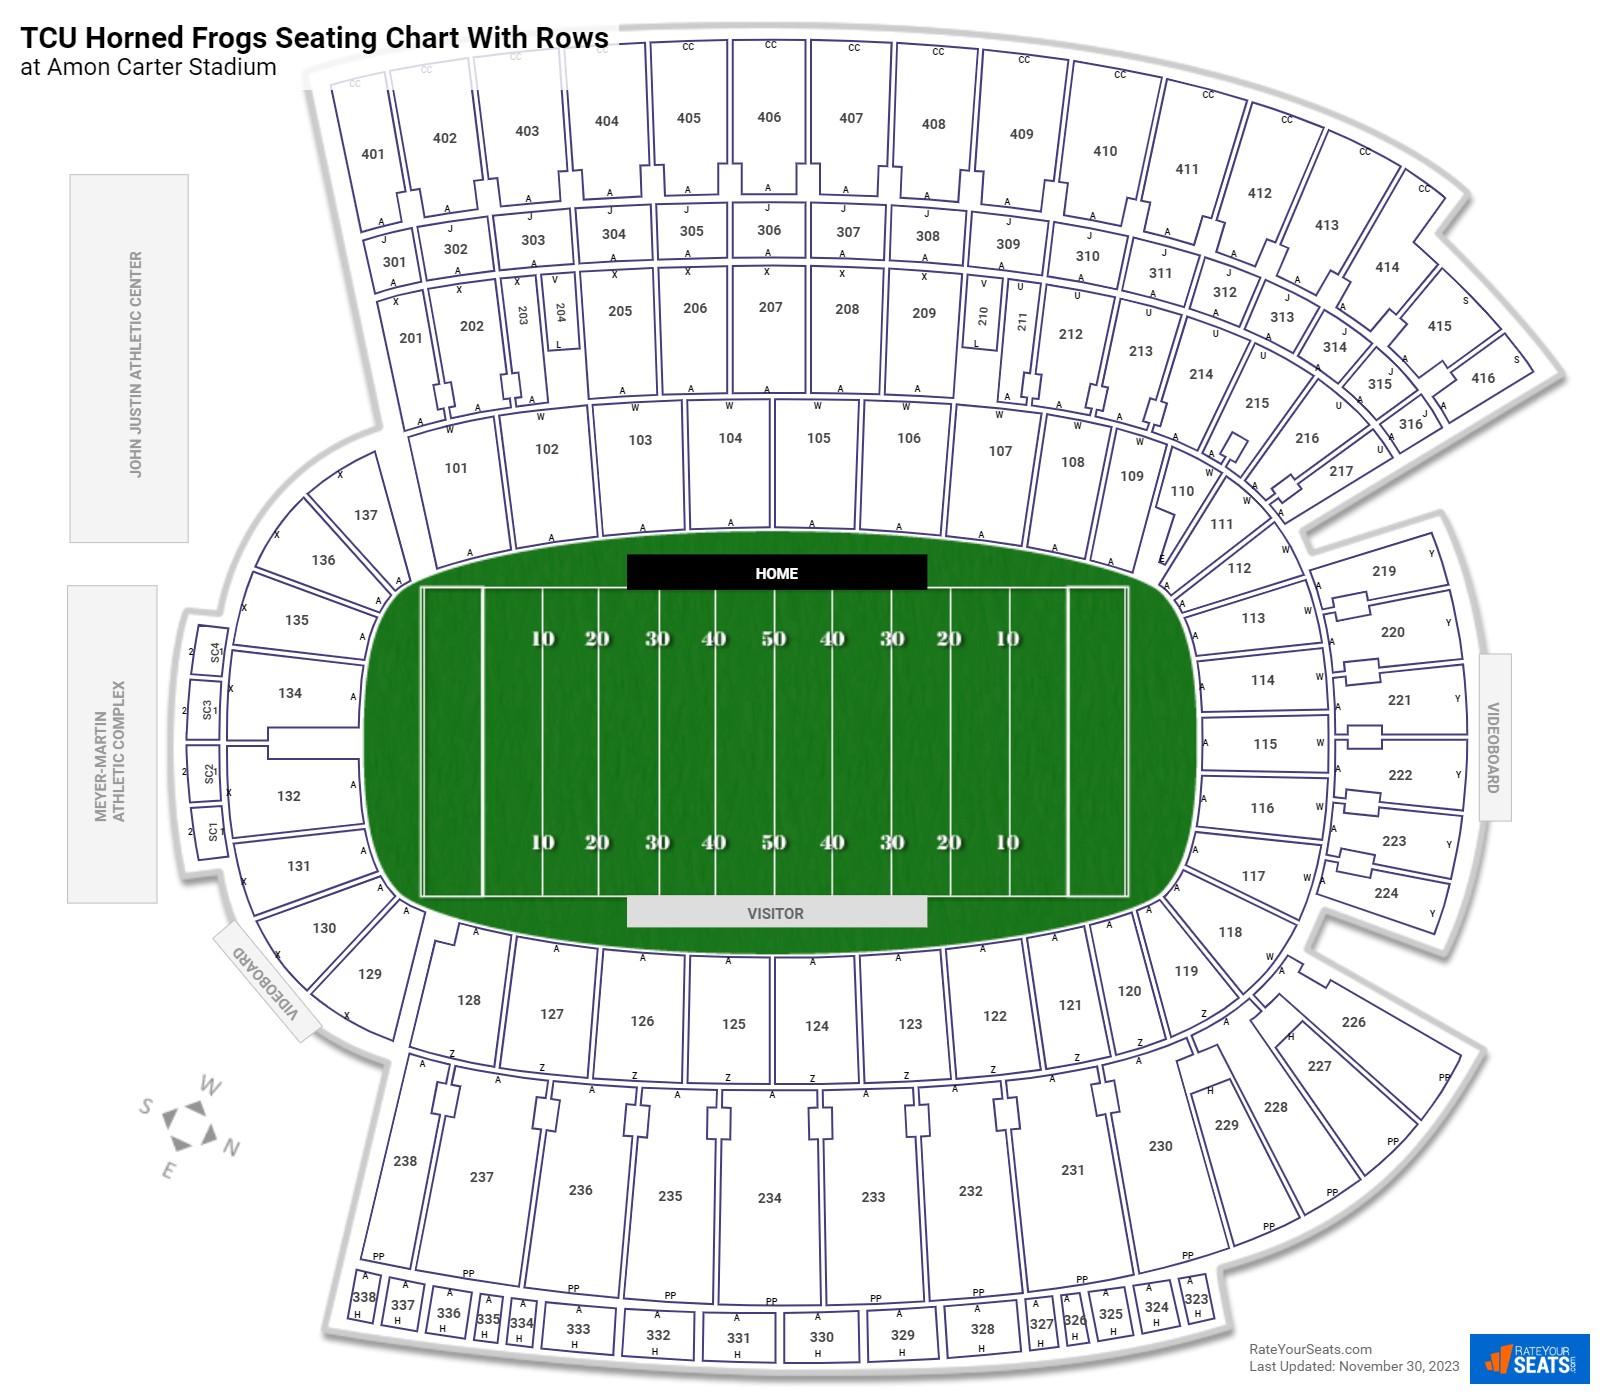 Amon Carter Stadium seating chart with row numbers